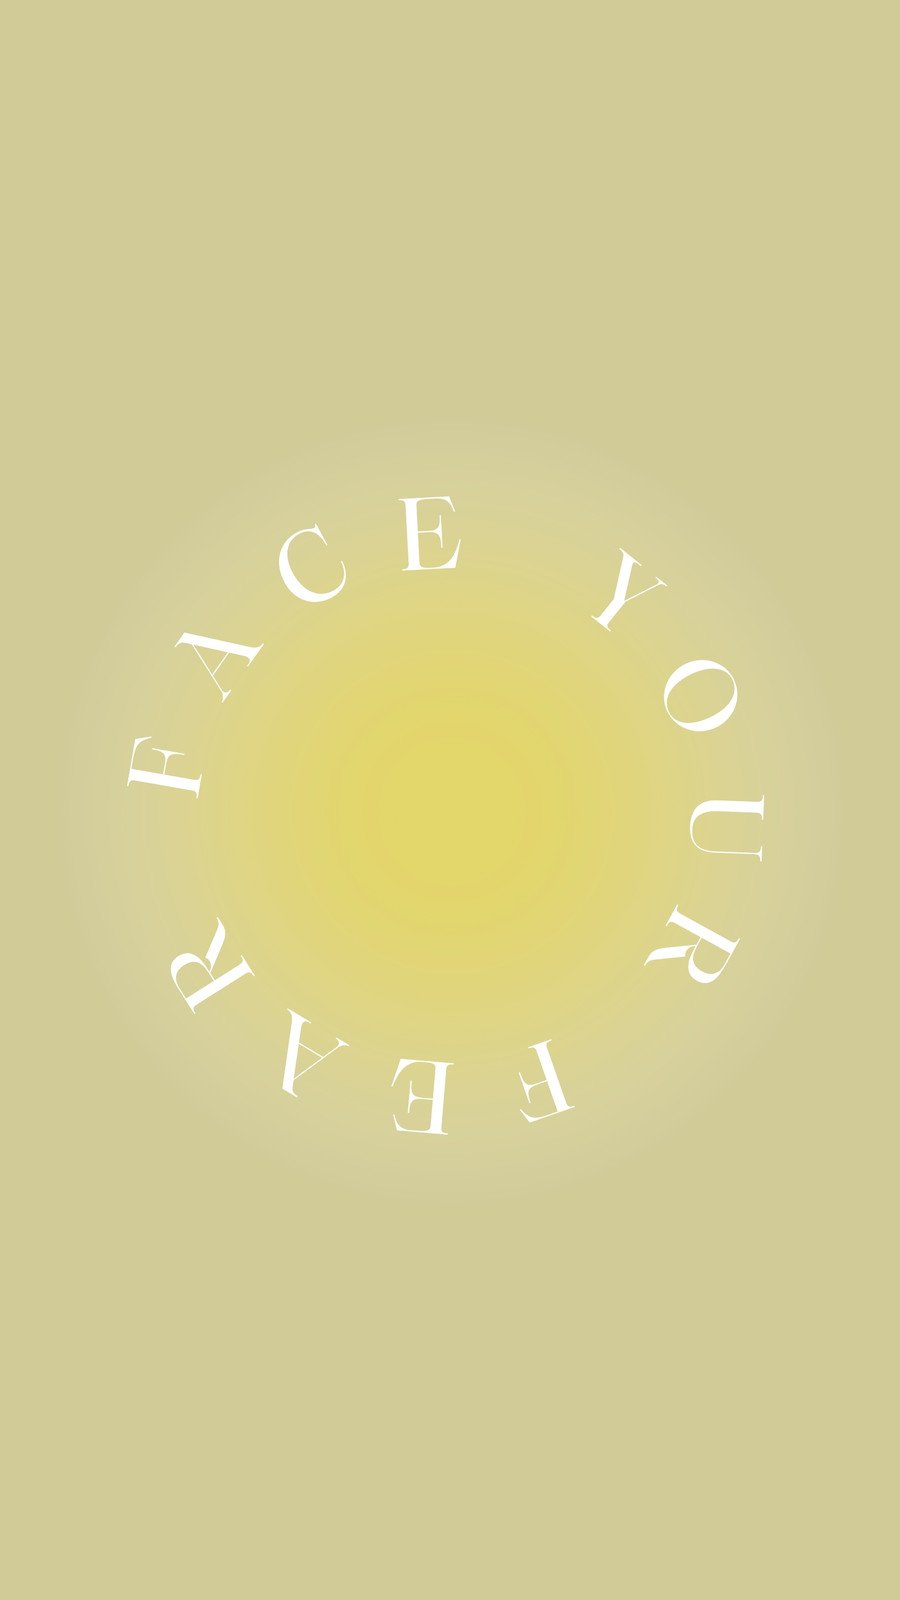 A cream background with a yellow sun in the middle and the words 